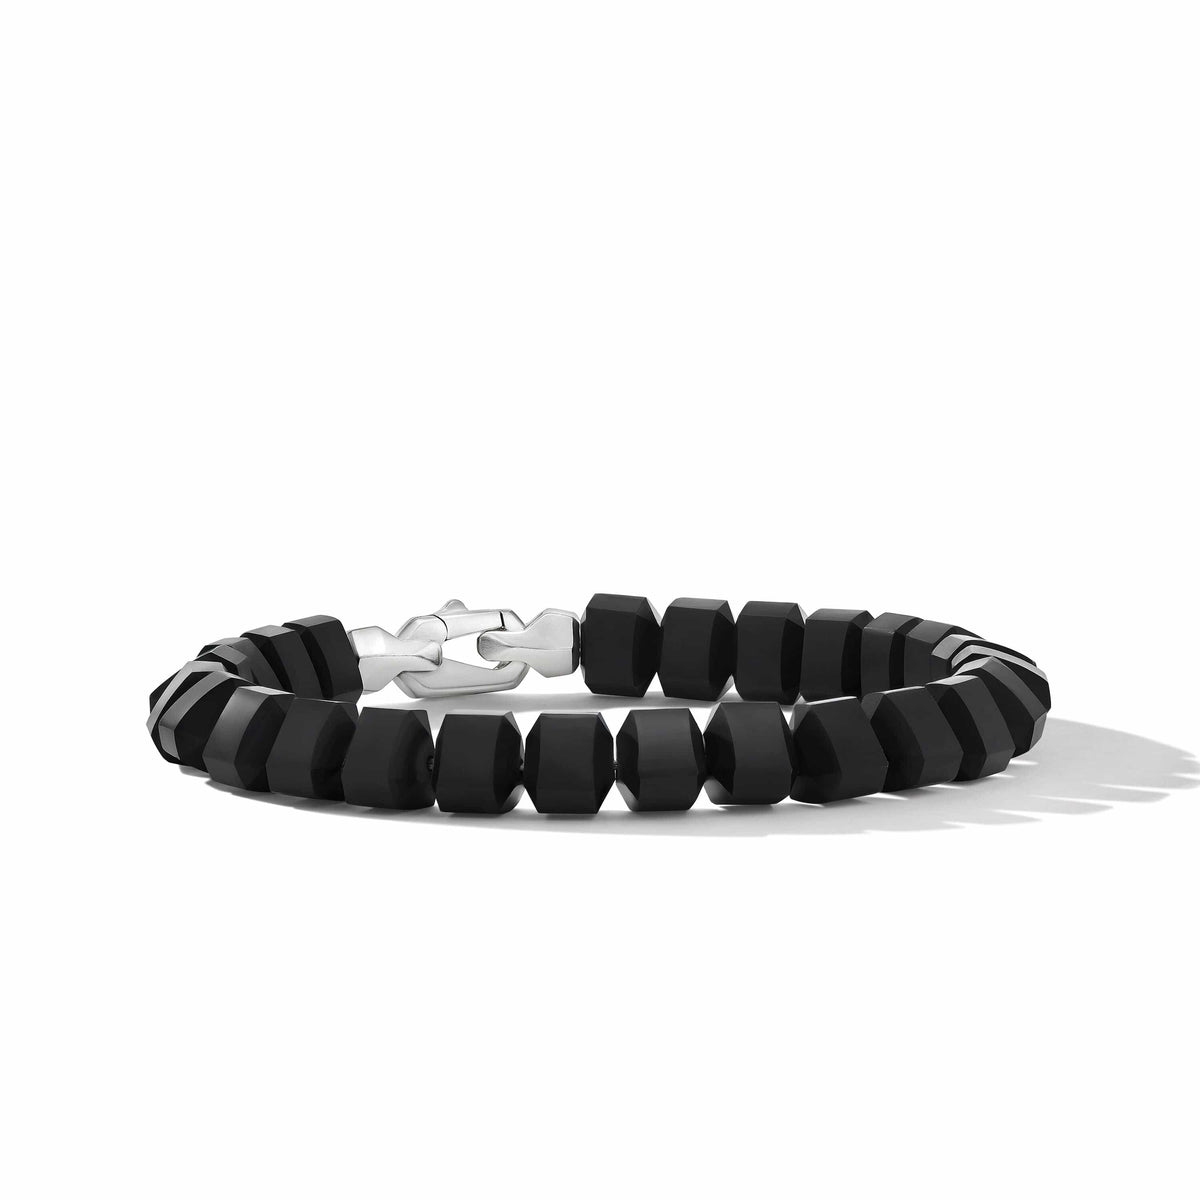 Spiritual Beads Bracelet in Sterling Silver with Black Onyx